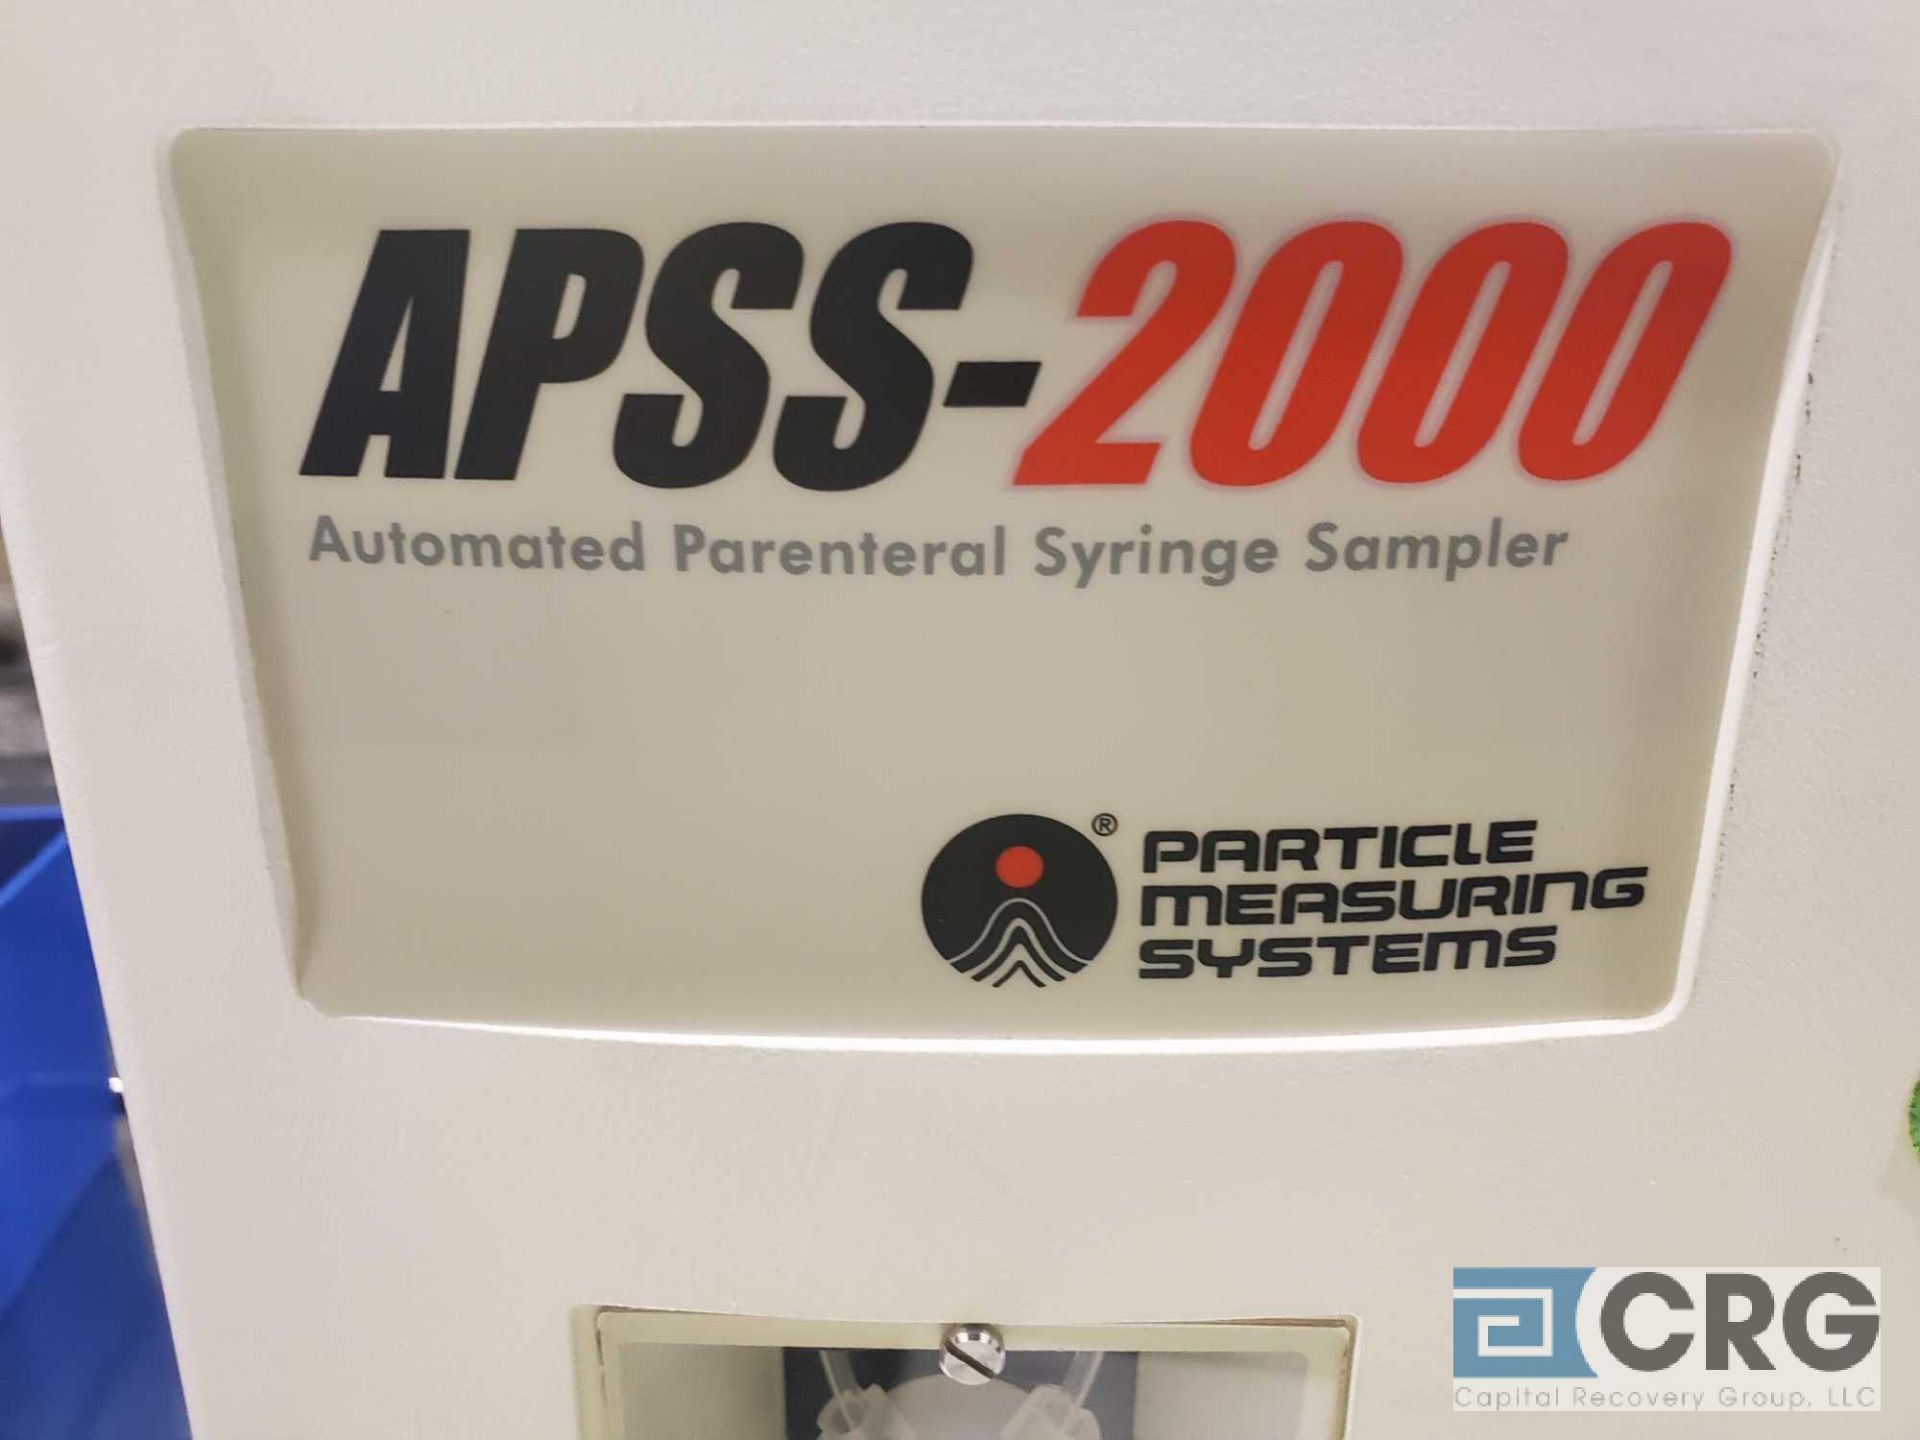 Automated Parenteral Syringe Sampler (APSS) APSS-2000 particle measuring system - Image 3 of 5